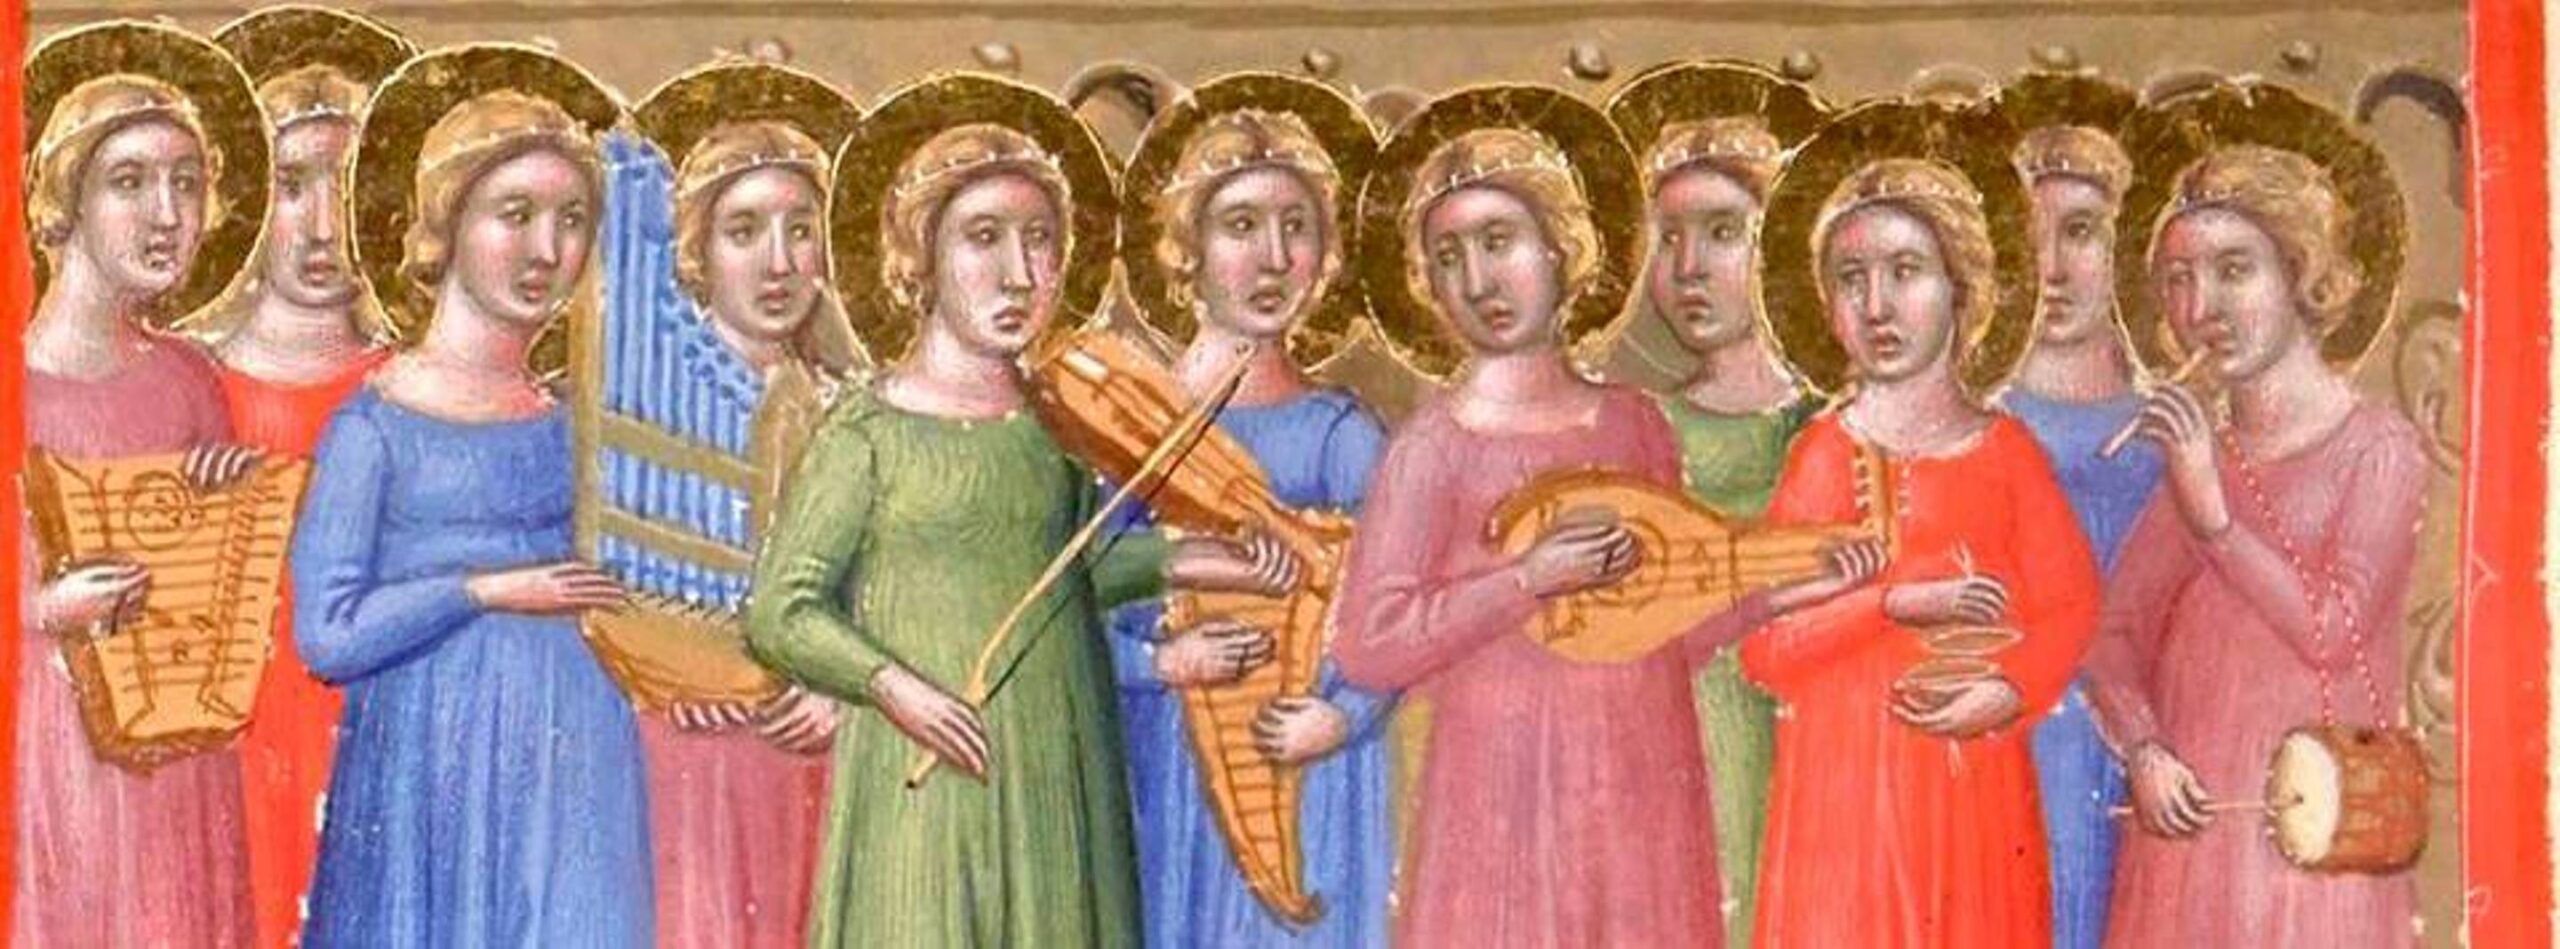 Early Music Muse